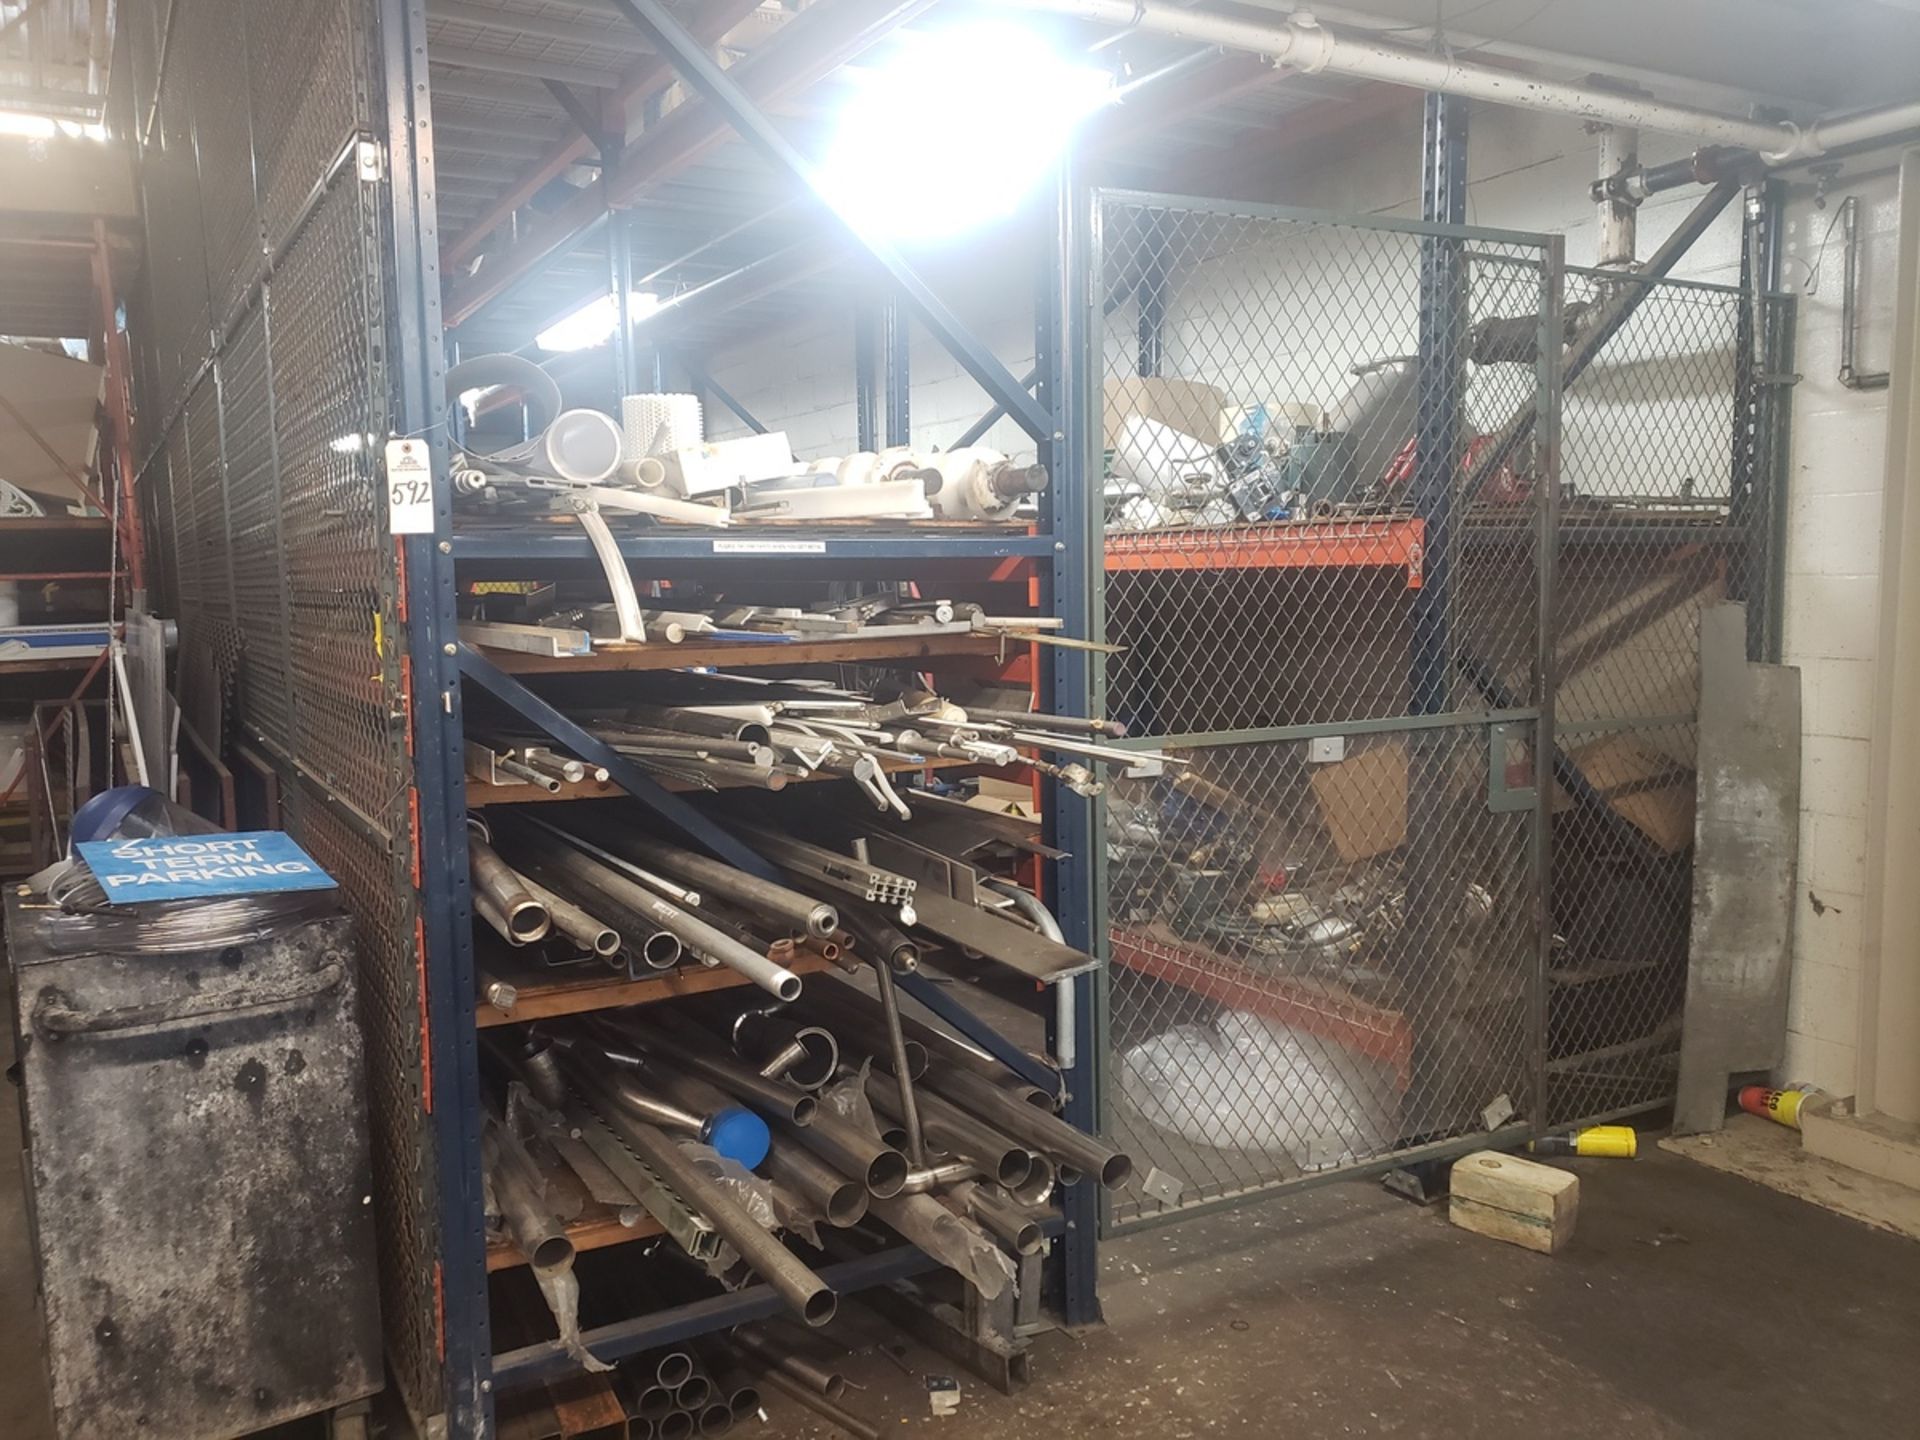 Contents of Storage Cage, Spare Parts